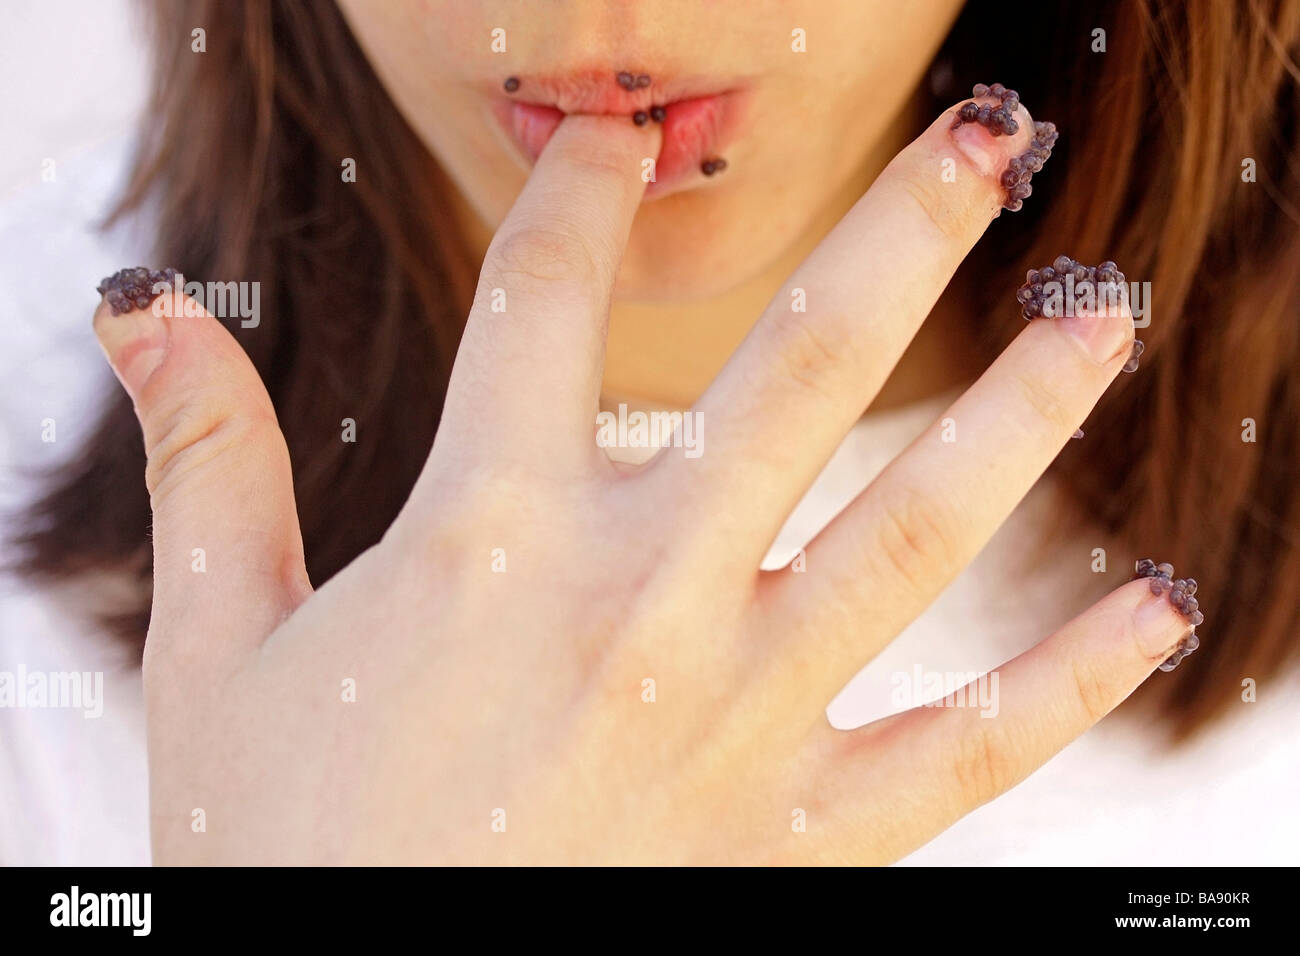 Eating caviar with fingers Stock Photo